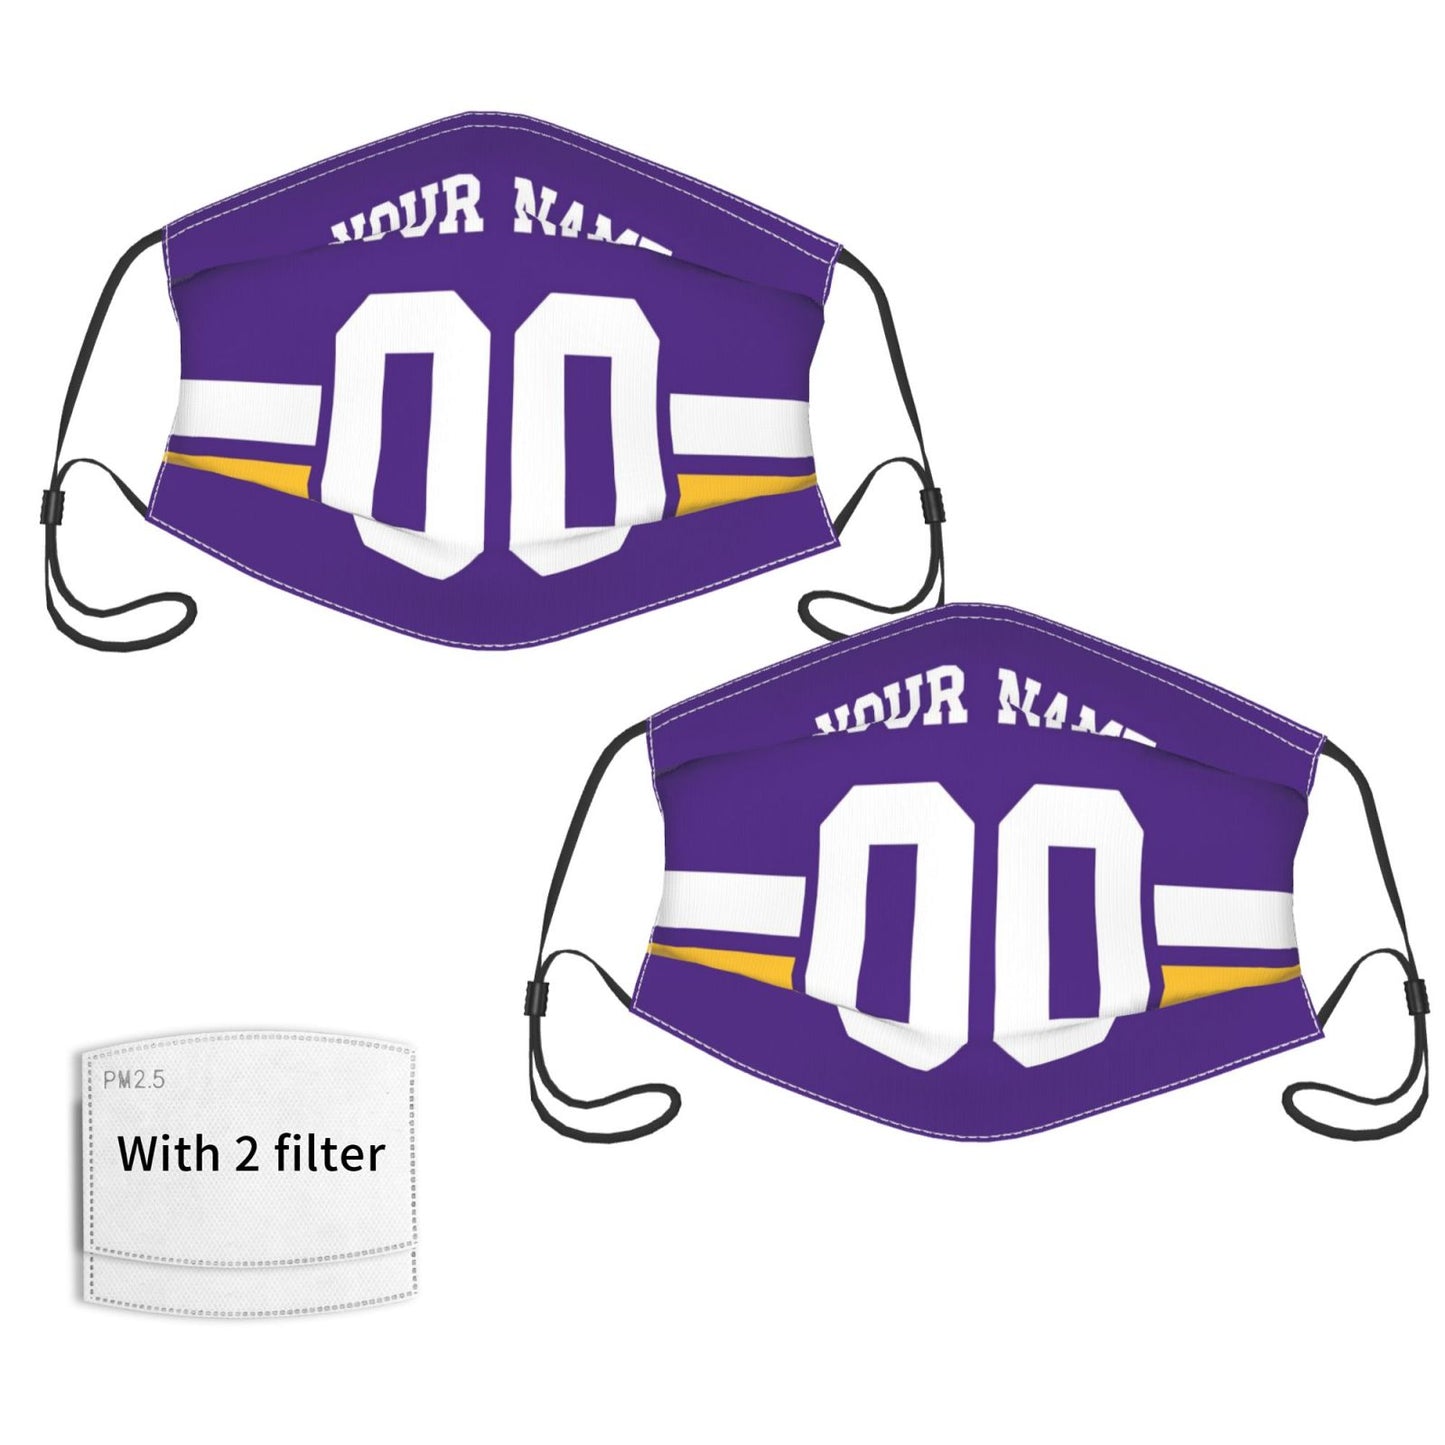 2-Pack Minnesota Vikings Face Covering Football Team Decorative Adult Face Mask With Filters PM 2.5 Purple